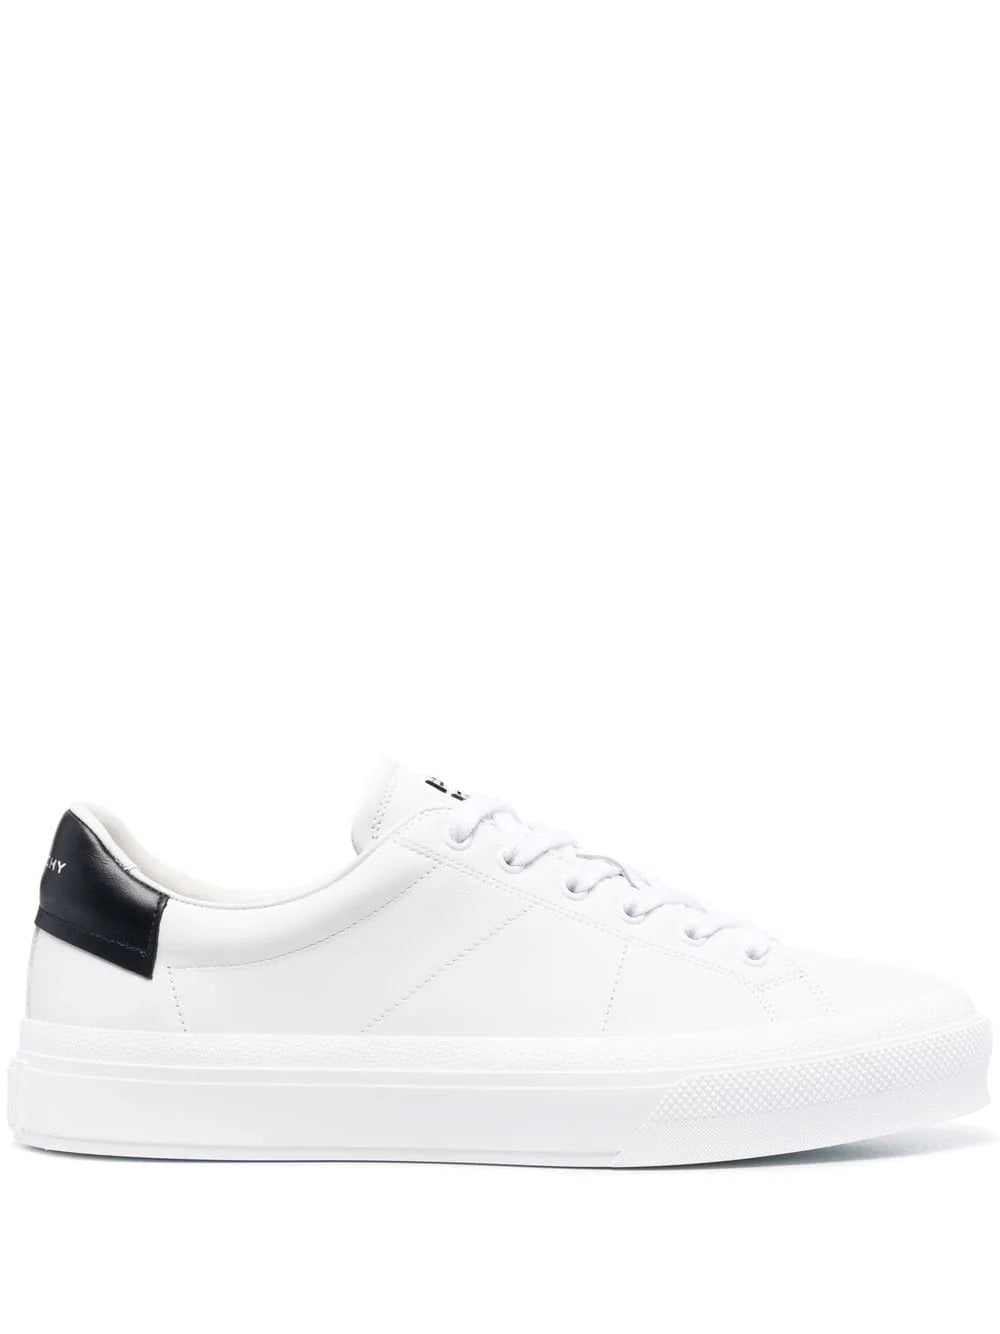 GIVENCHY Sneakers in pelle bianca